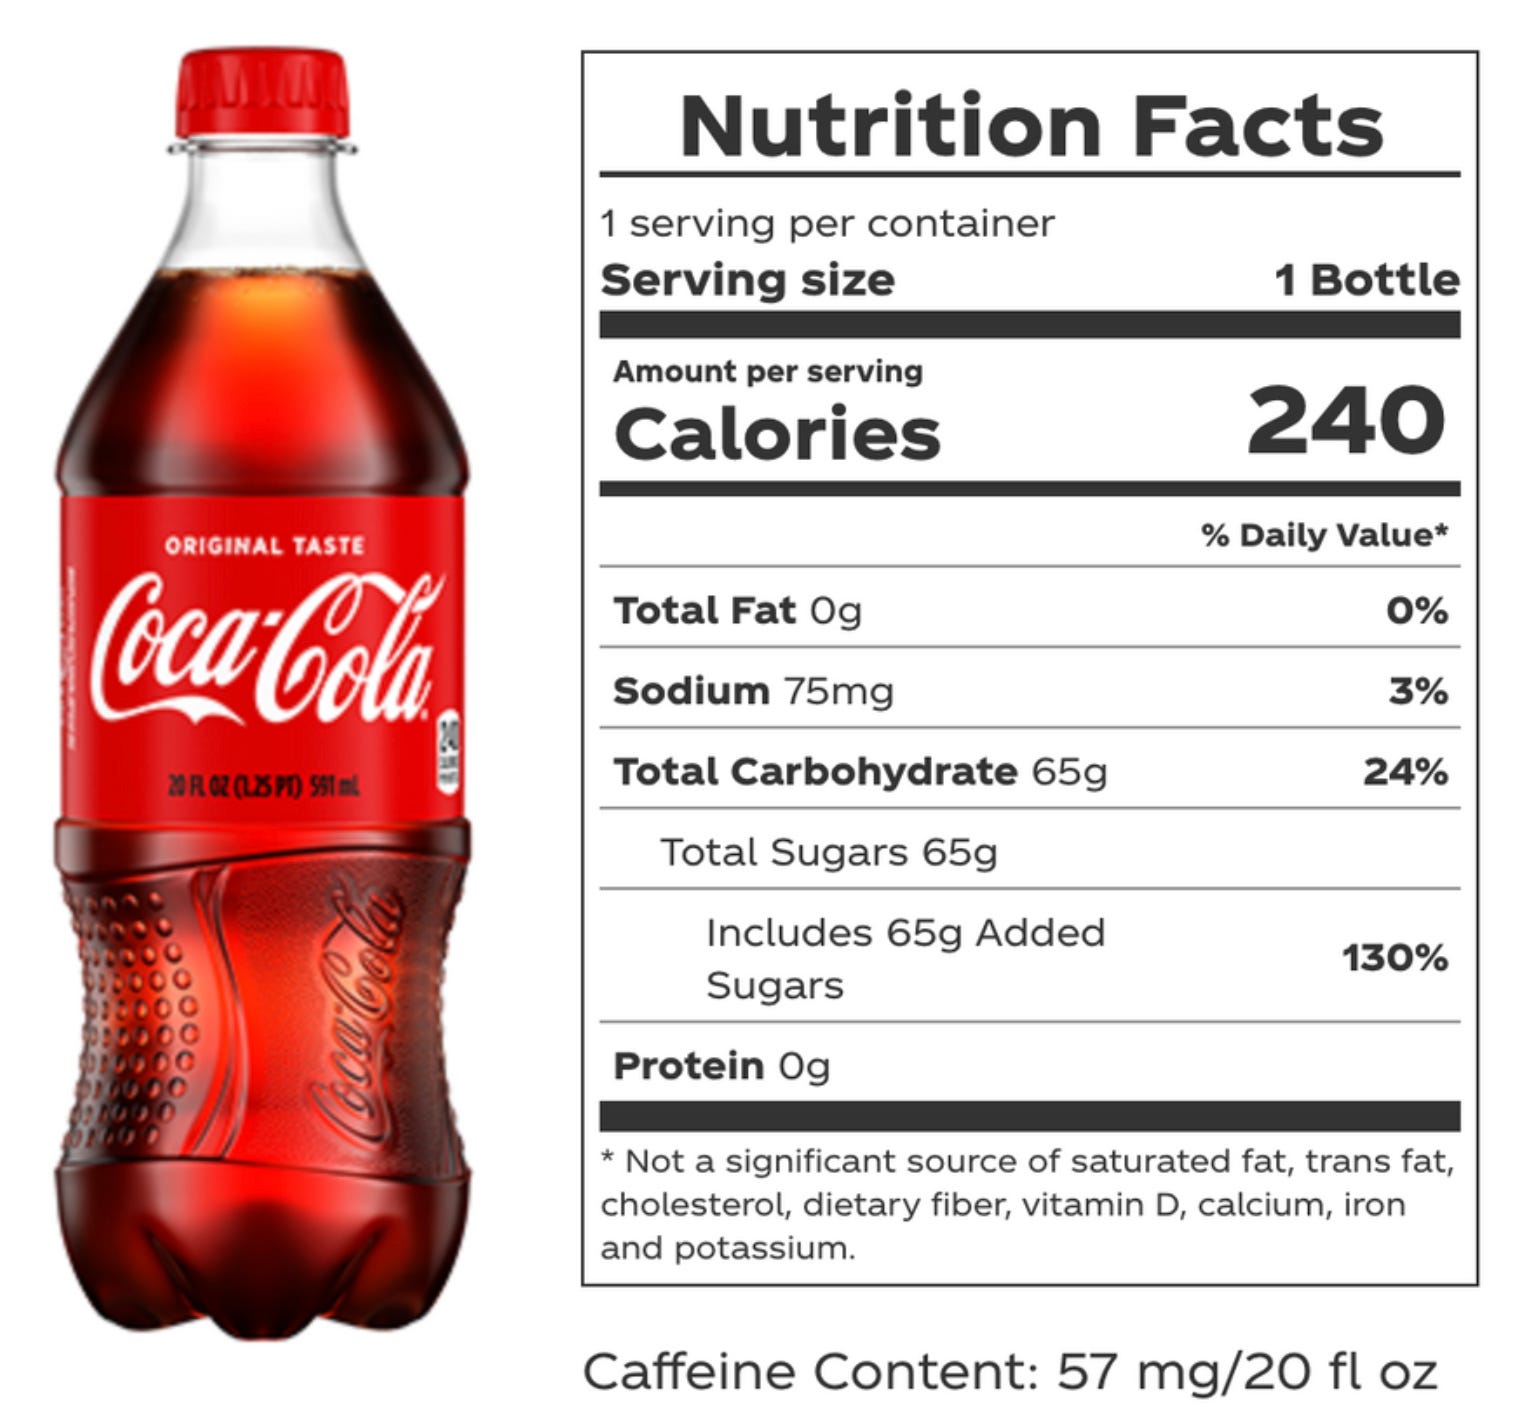 Soda health Facts: Are soft drinks really bad for you?